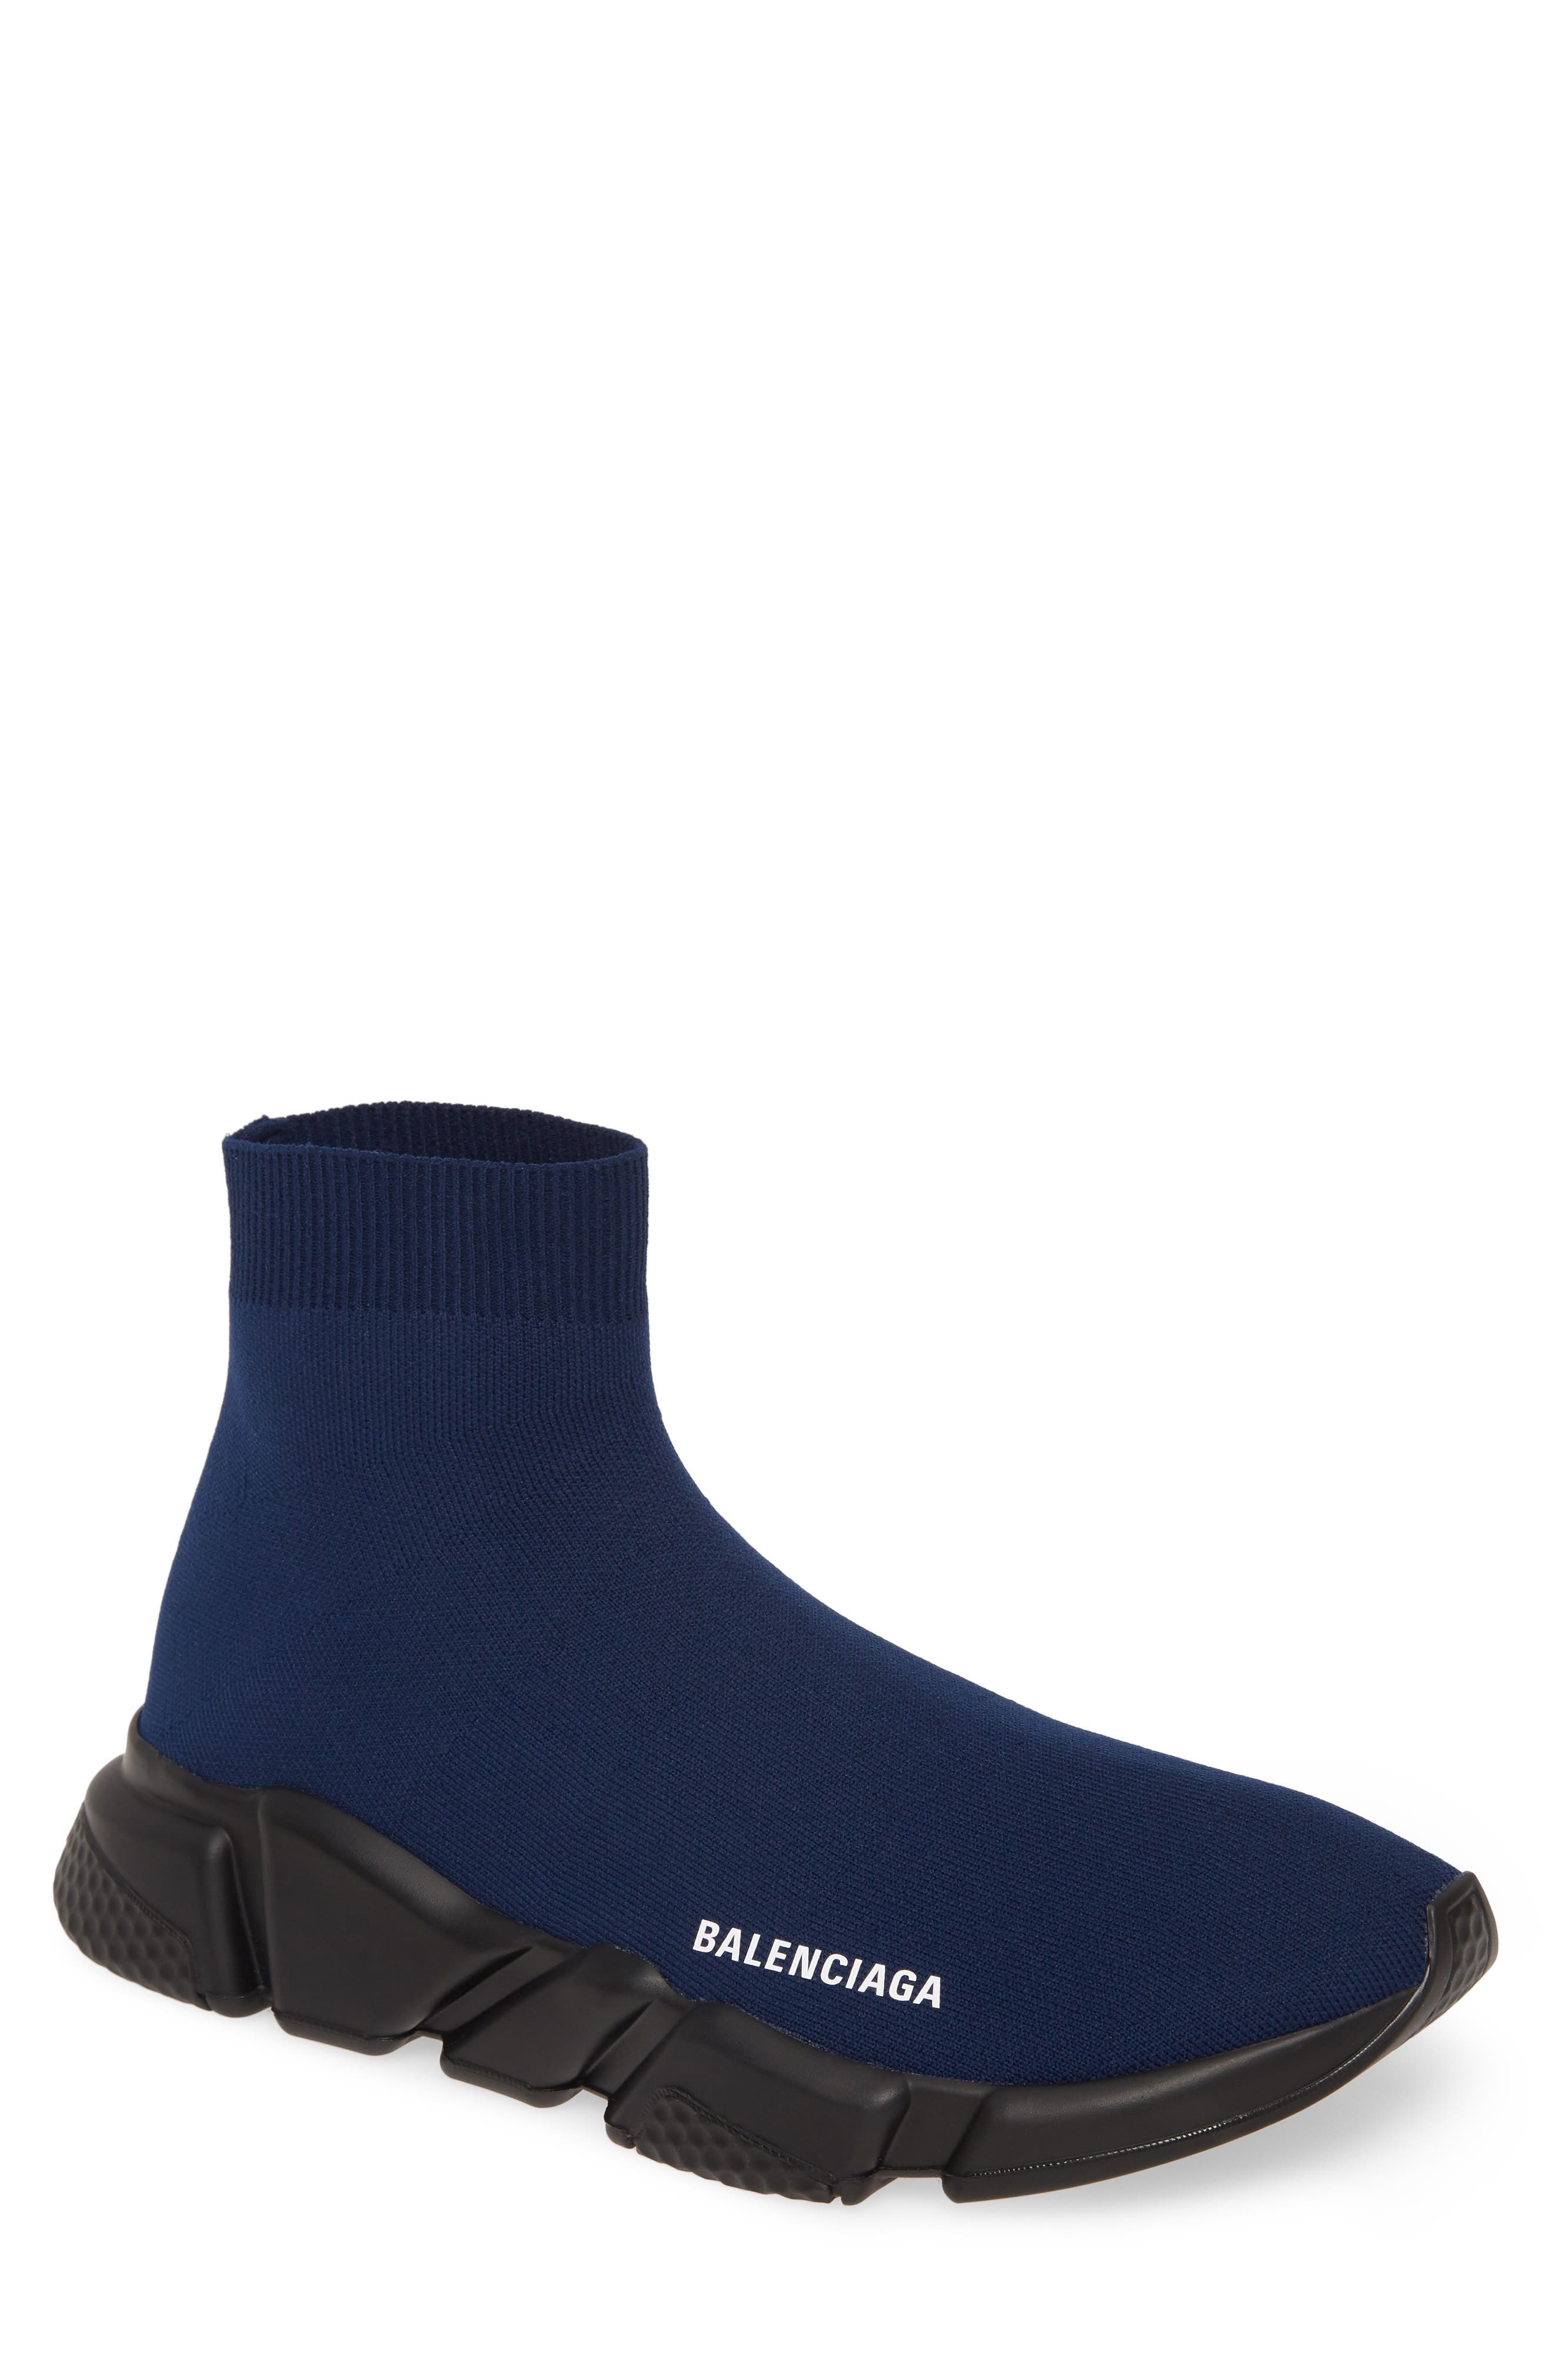 BALENCIAGA Track Trainers Blue Colorway in 2019